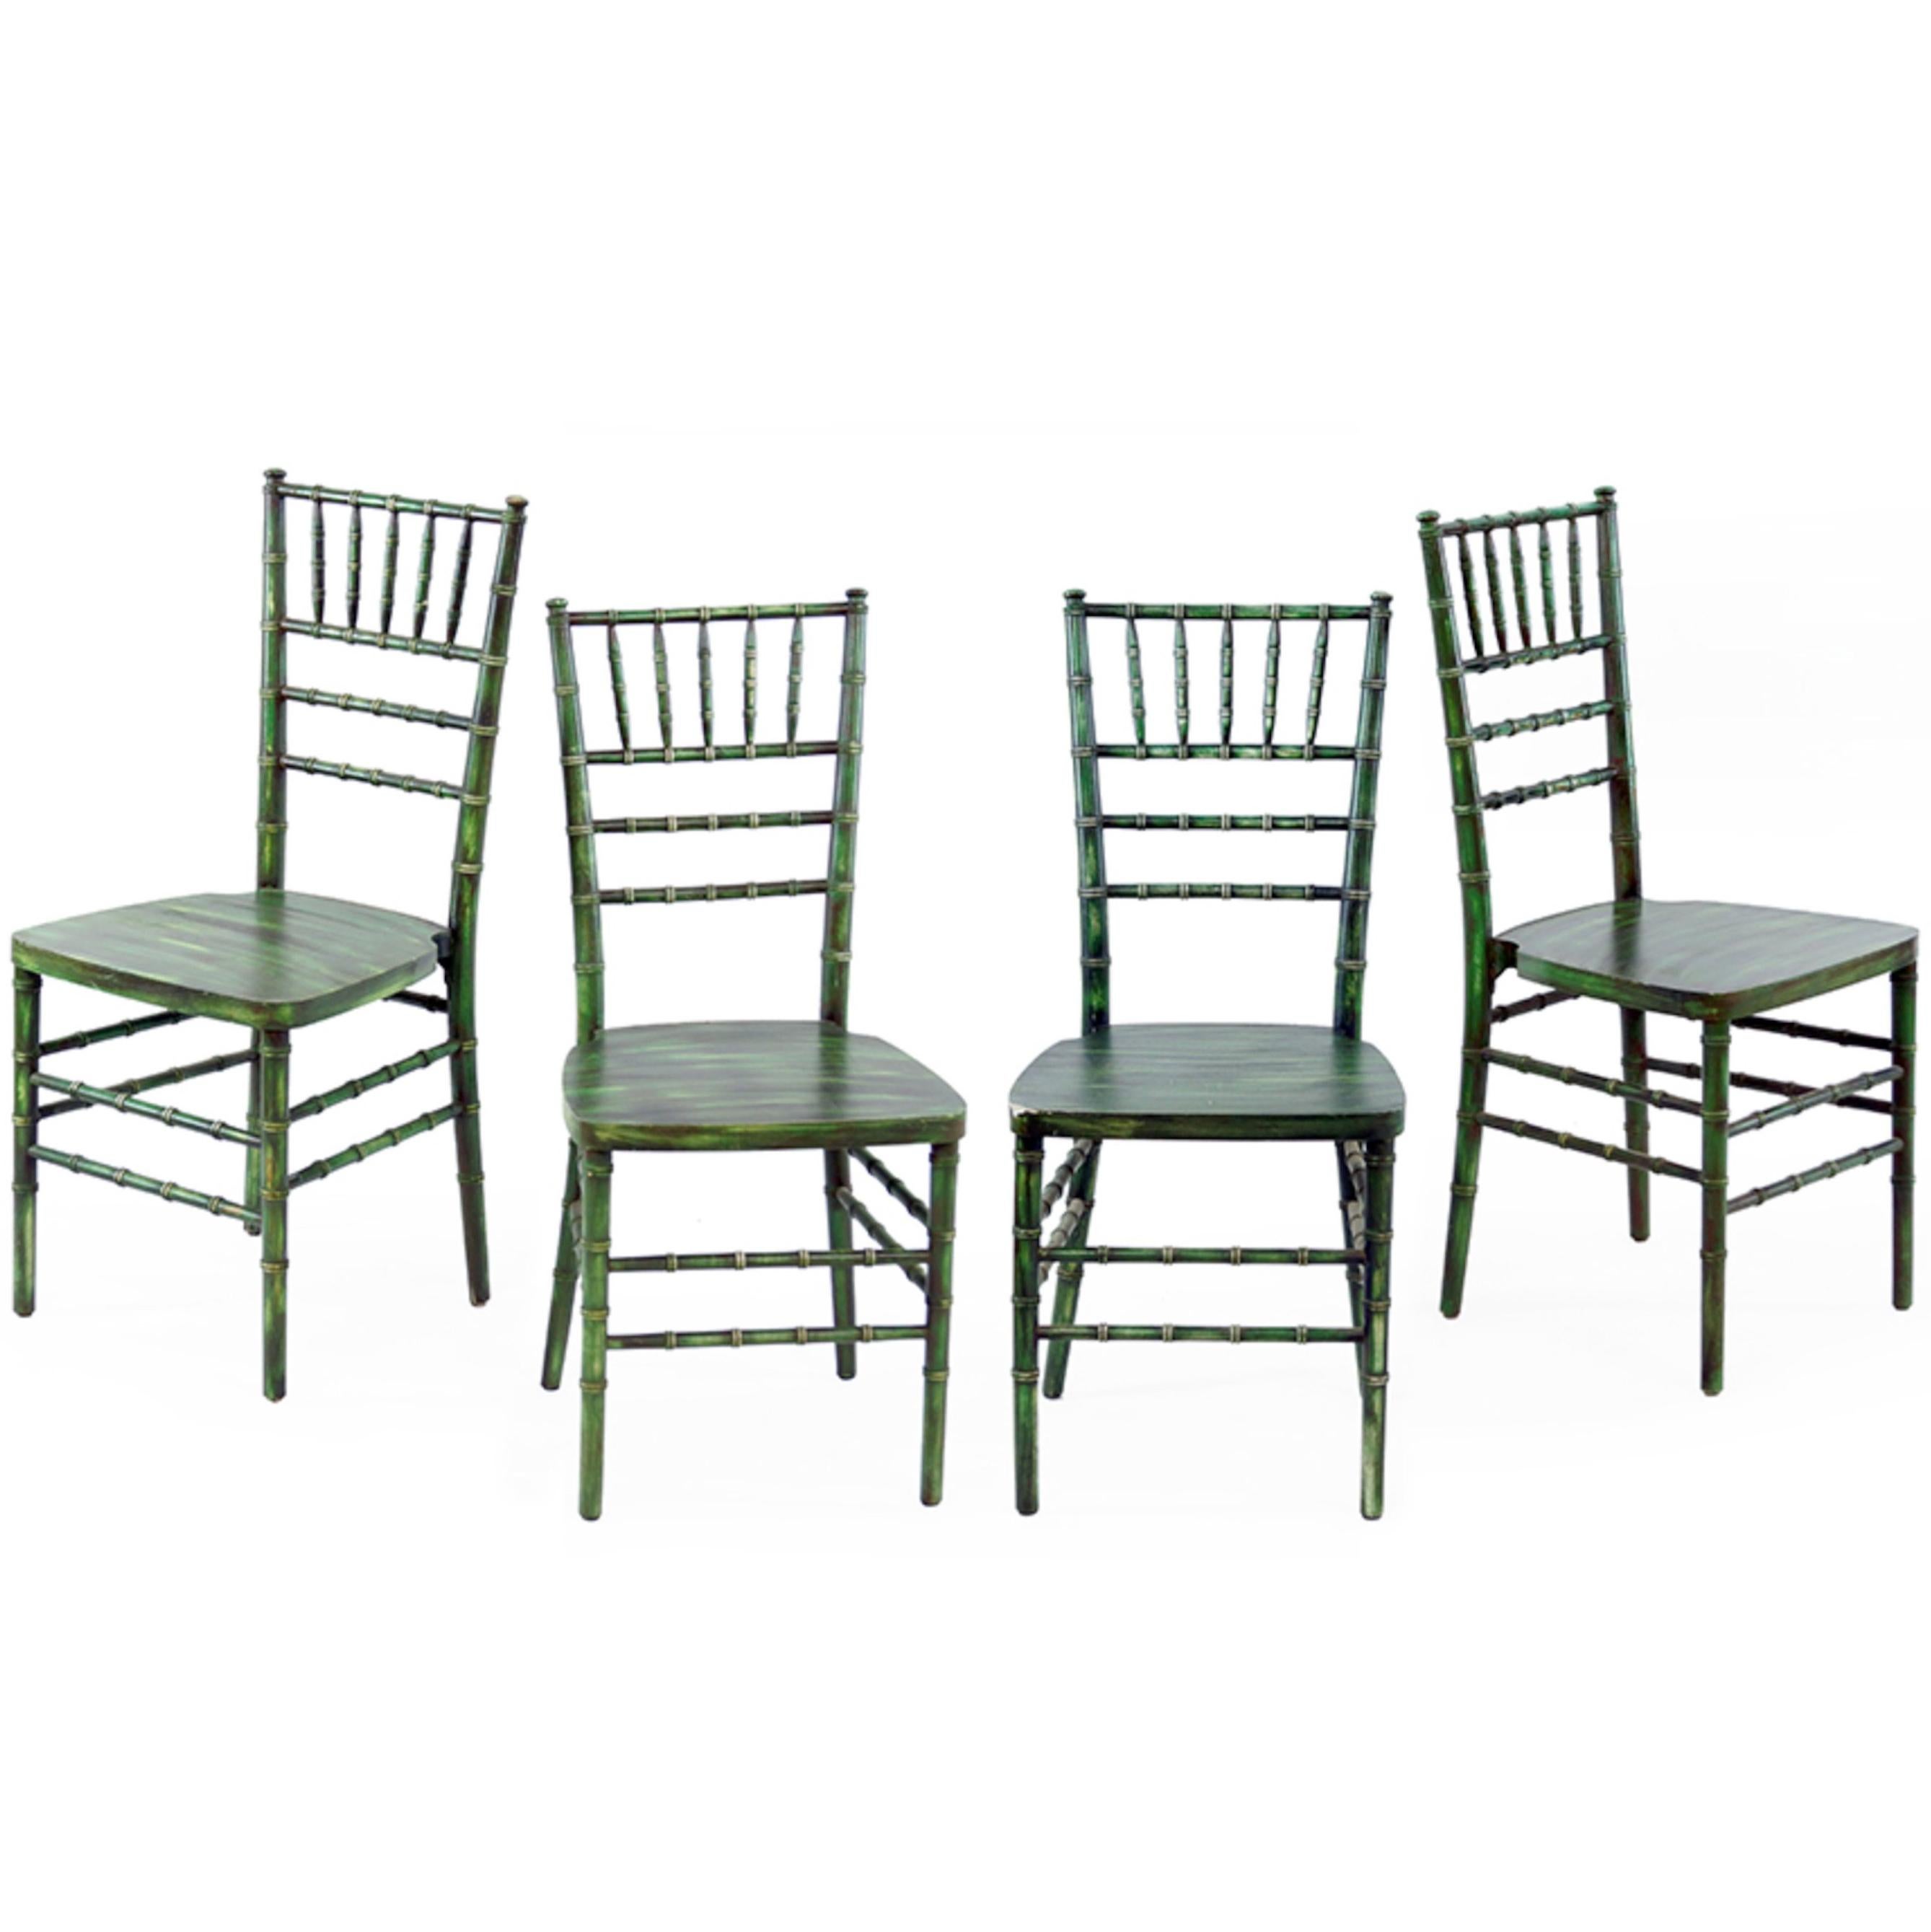 Set of Four Faux Bamboo Opera Chairs with Faux Finish